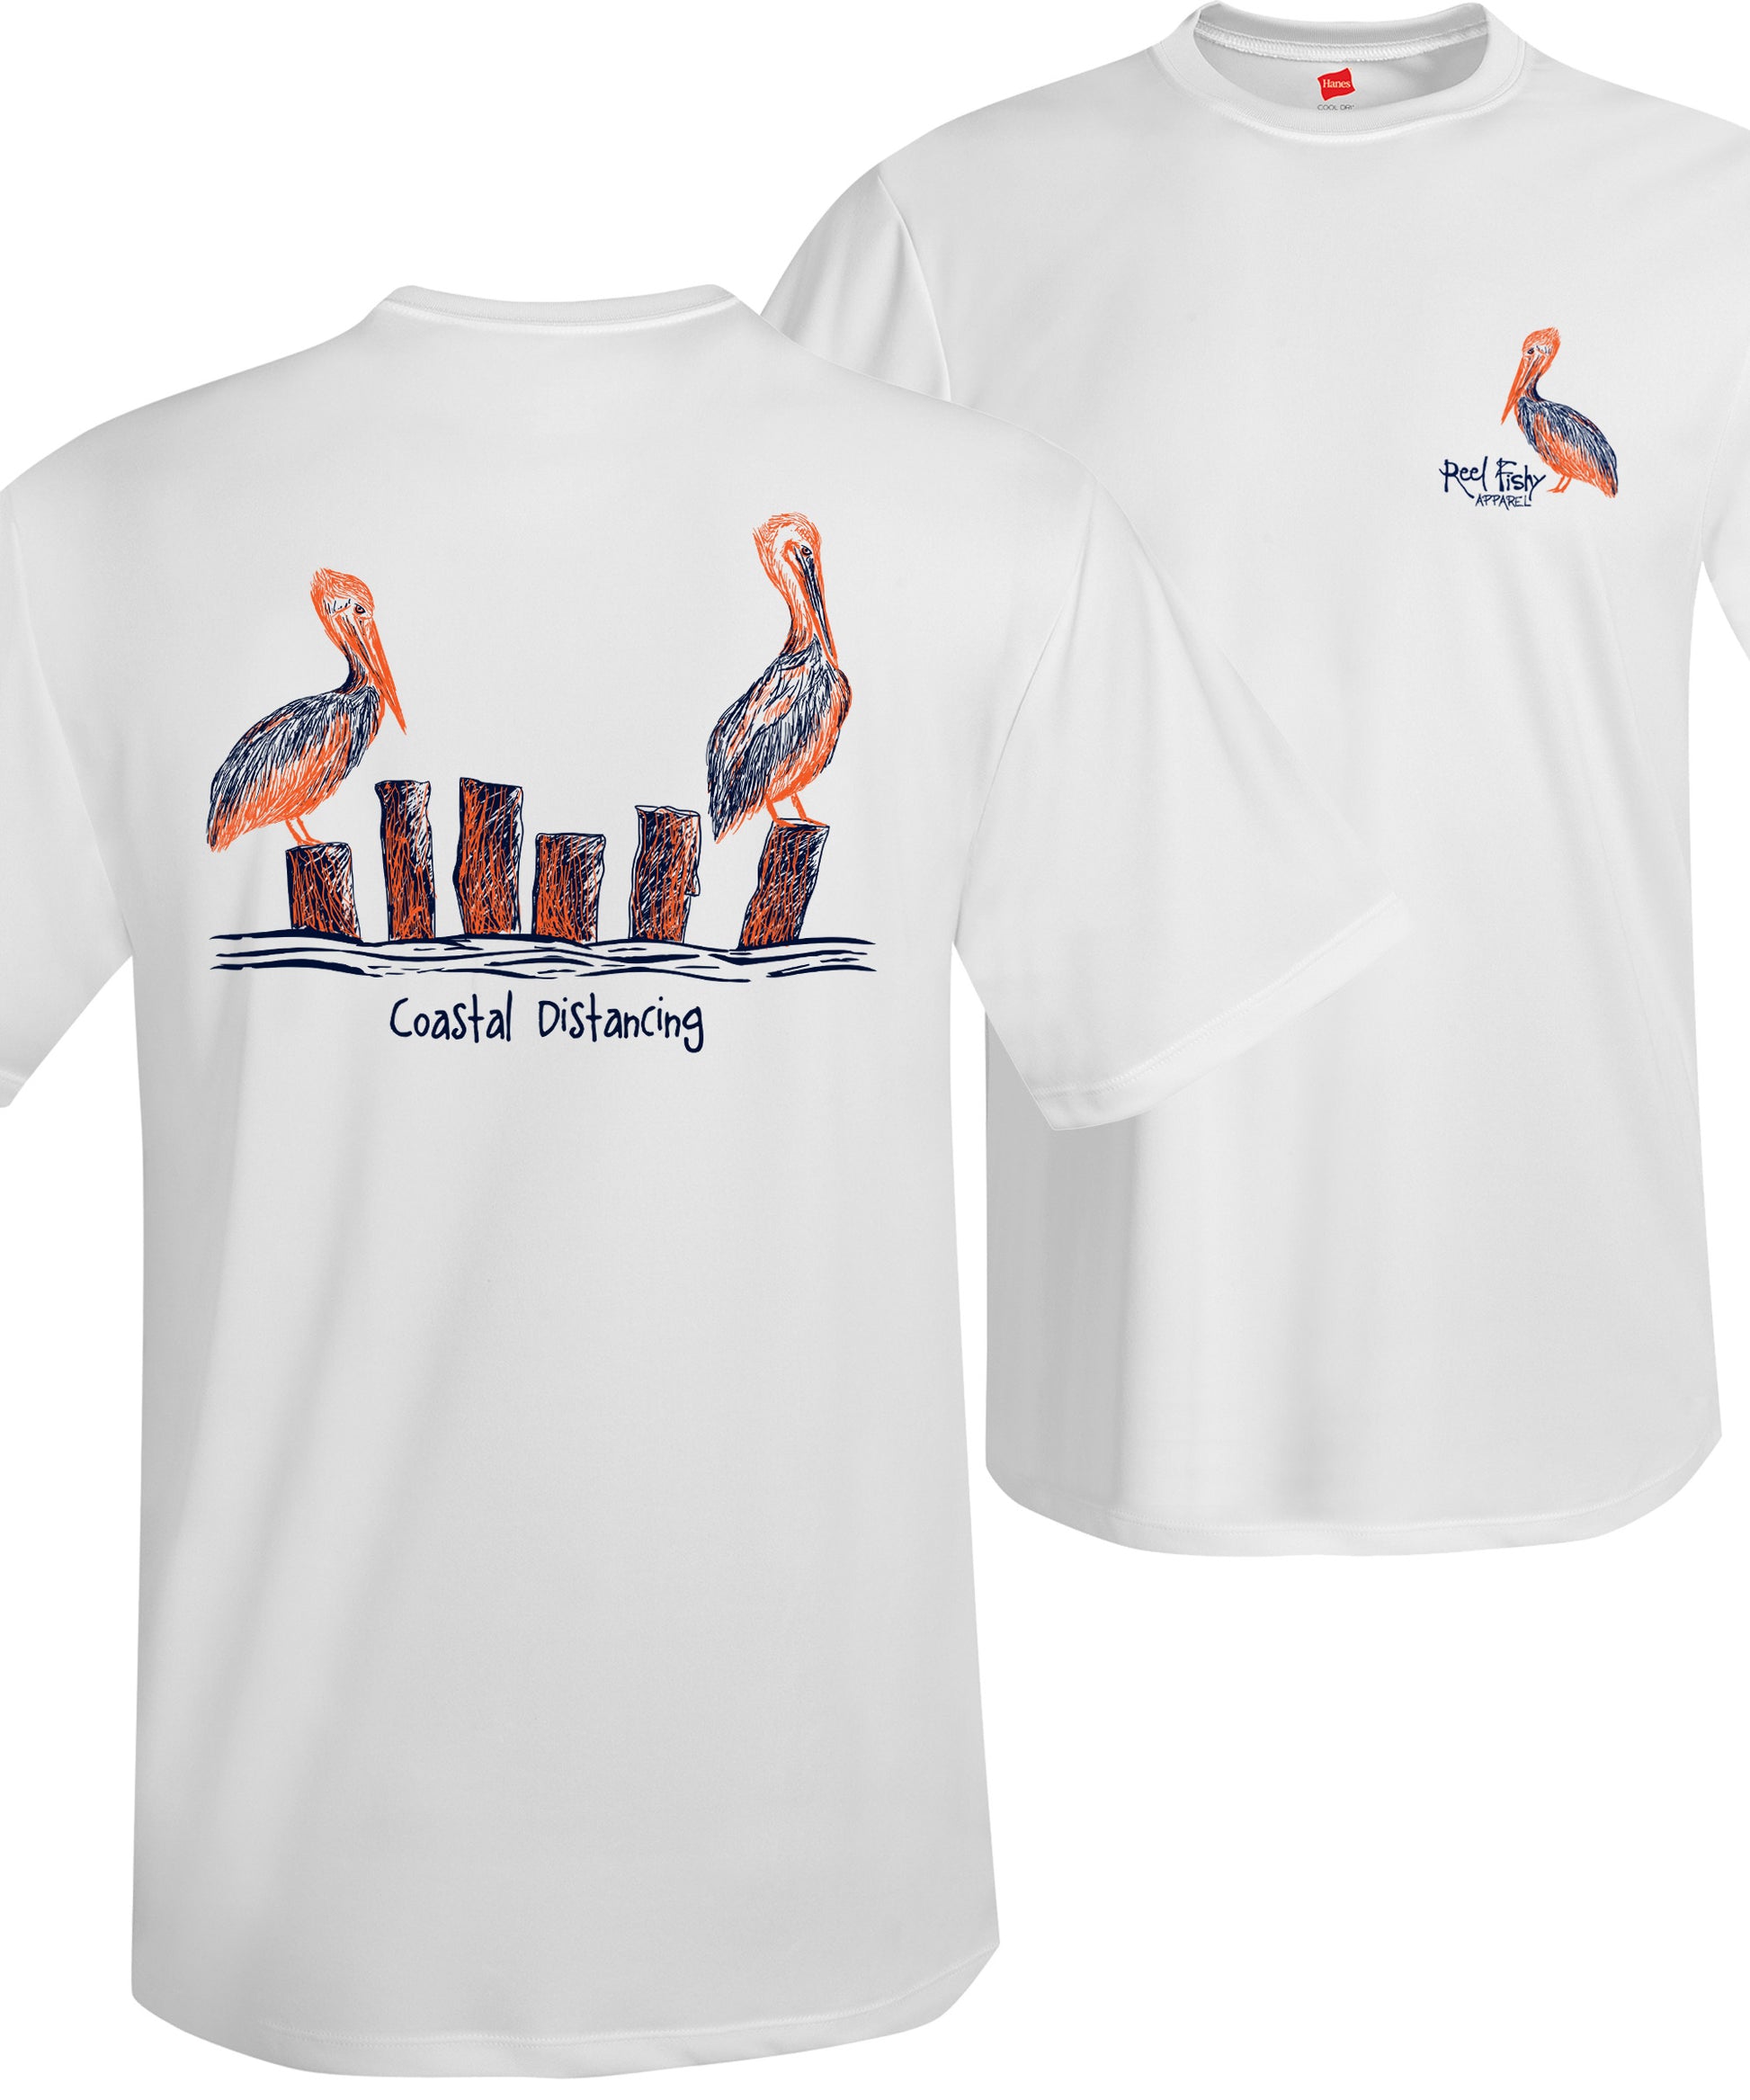 Pelicans Coastal Distancing Performance Dry-fit White Short Sleeve Shirts